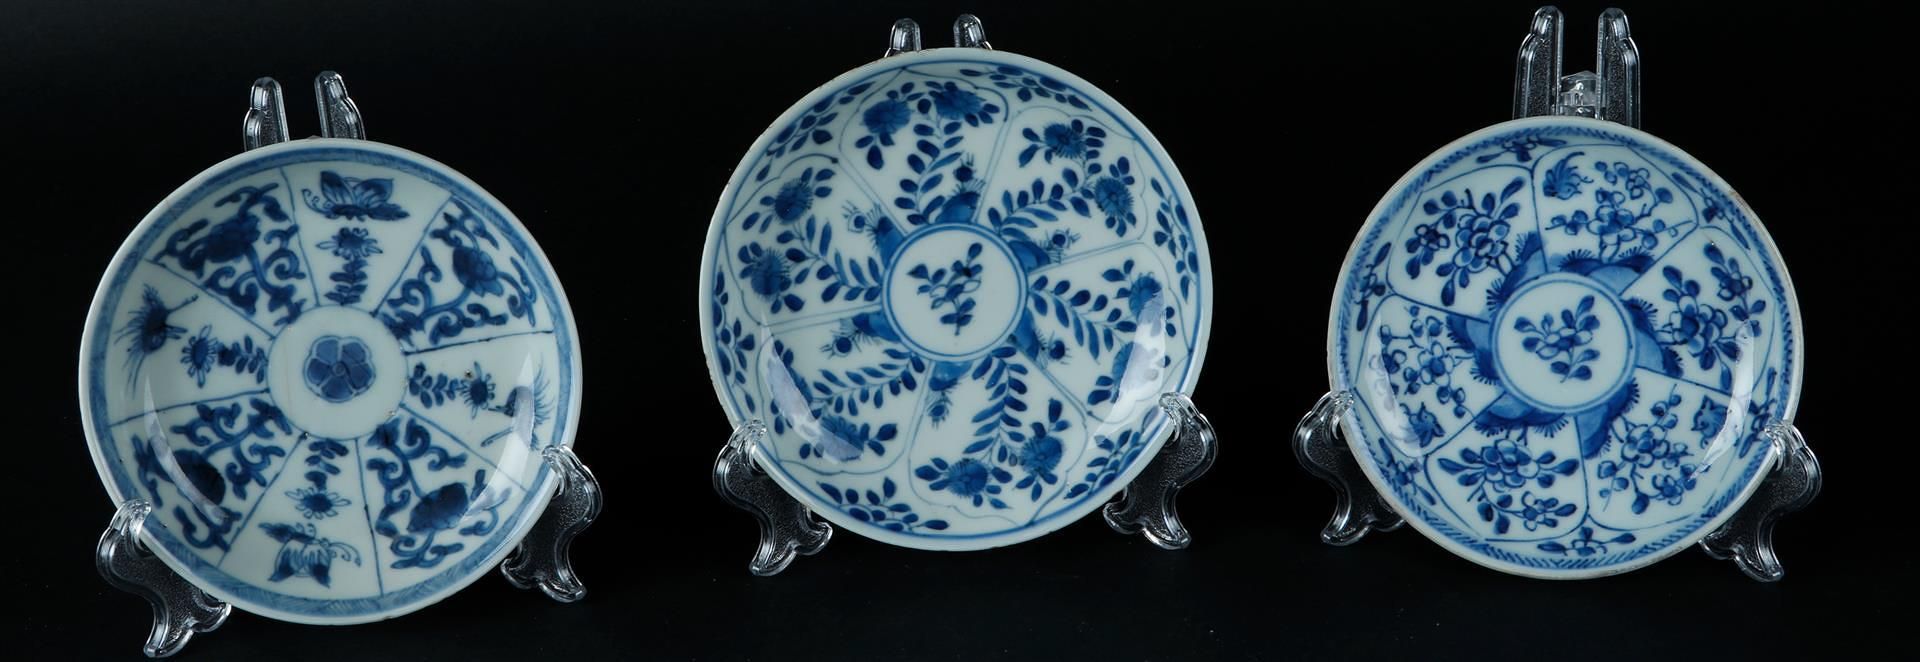 Three various porcelain plates with divisions and with lotus leaf divisions, with floral decoration.